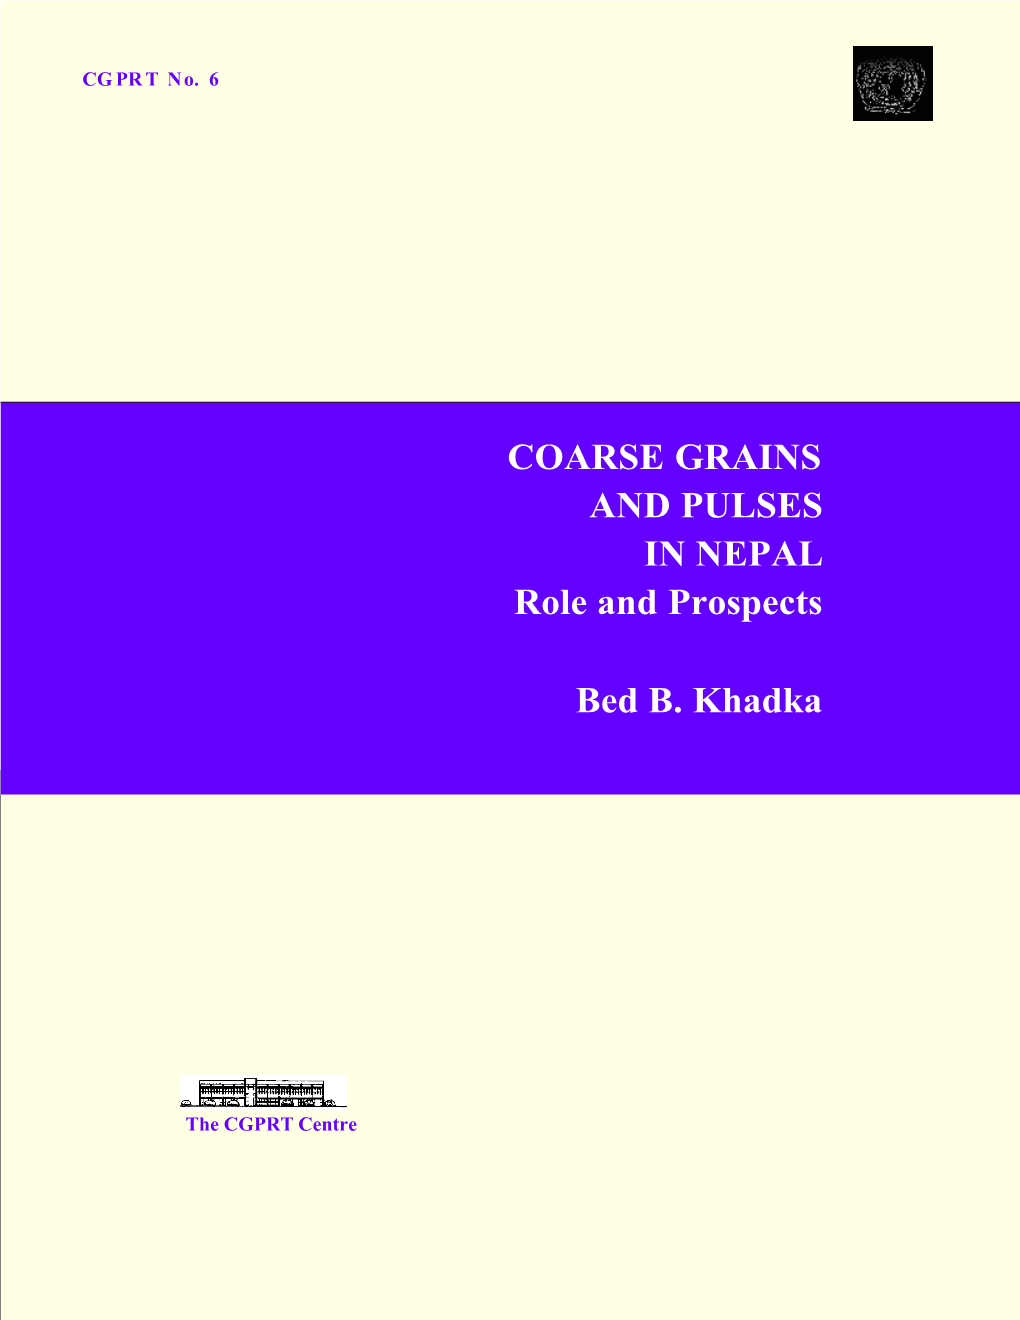 Coarse Grains and Pulses in Nepal: Role and Prospects" Is the Second in This Series of Country Reports